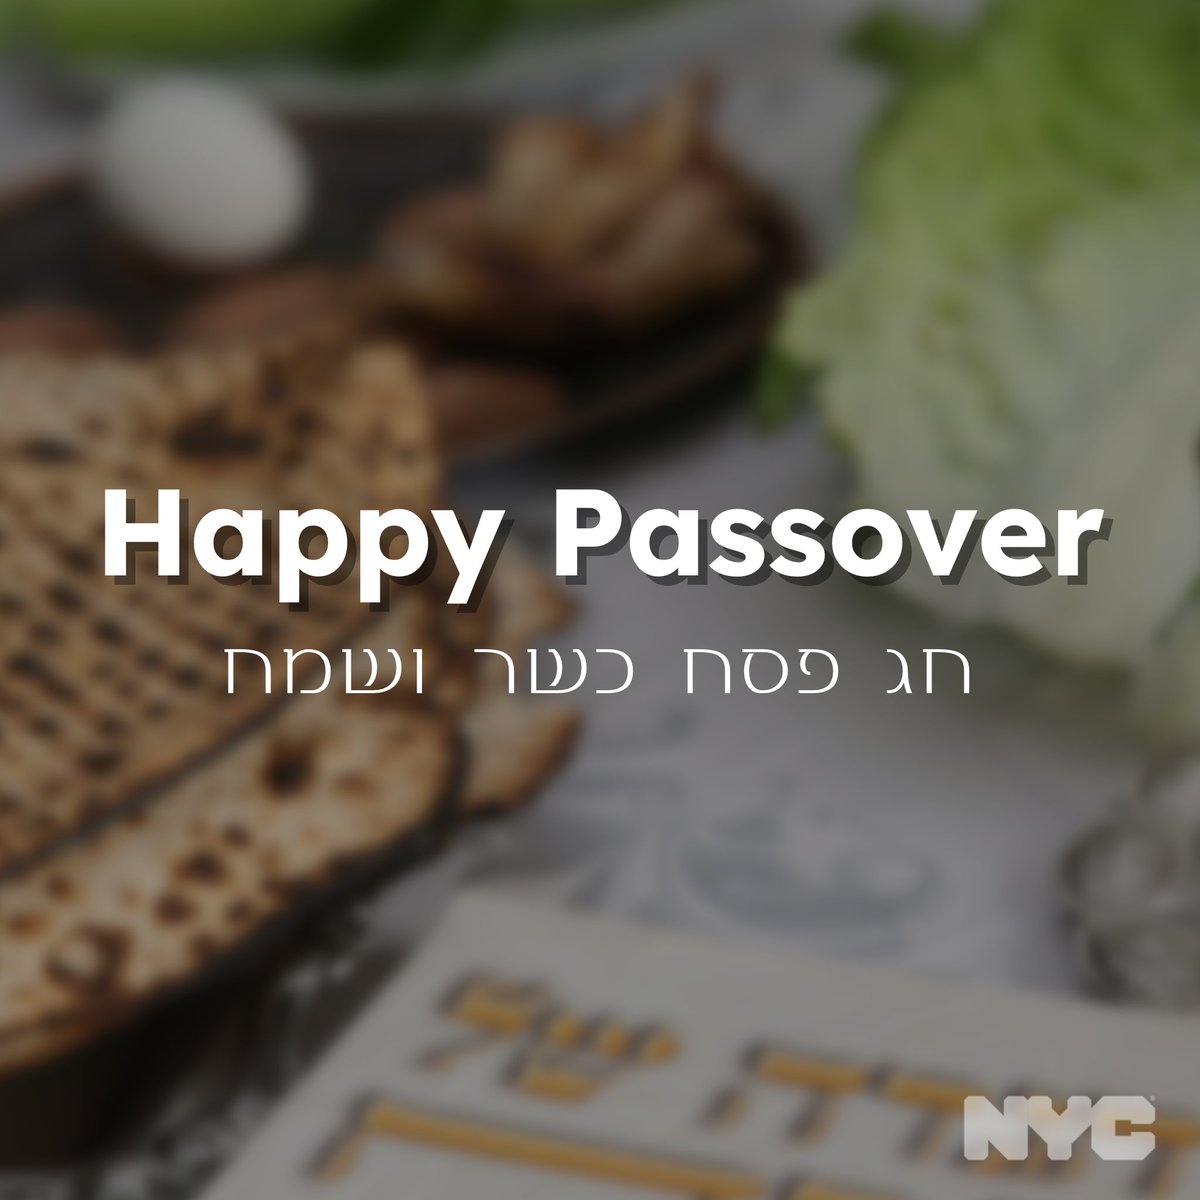 Chag Sameach, NYC! We’re wishing all those celebrating a joyous Passover. May this time bring peace, prosperity, and happiness.